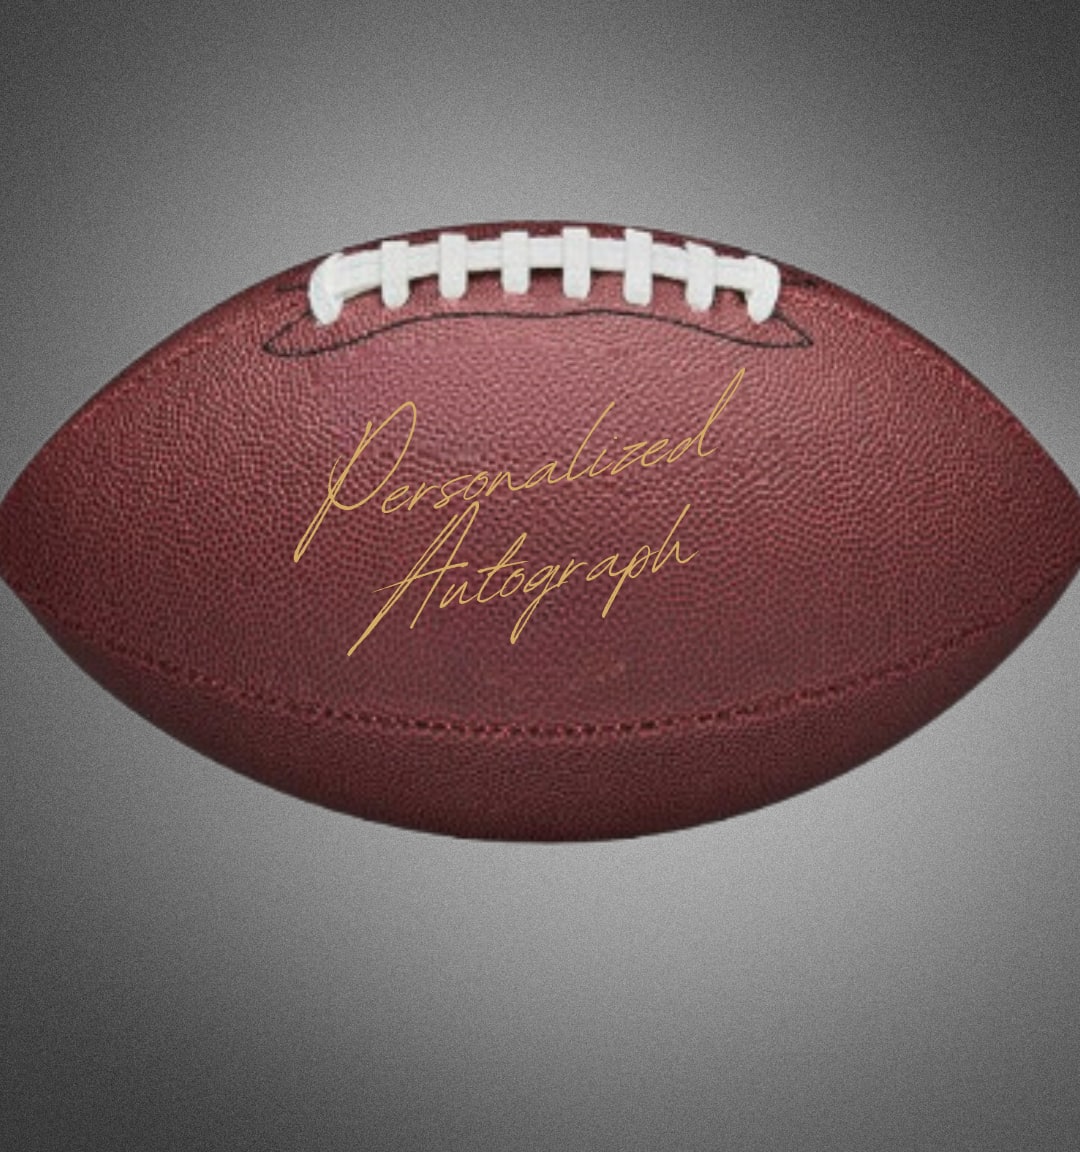 Limited Edition James Lee Autographed Football